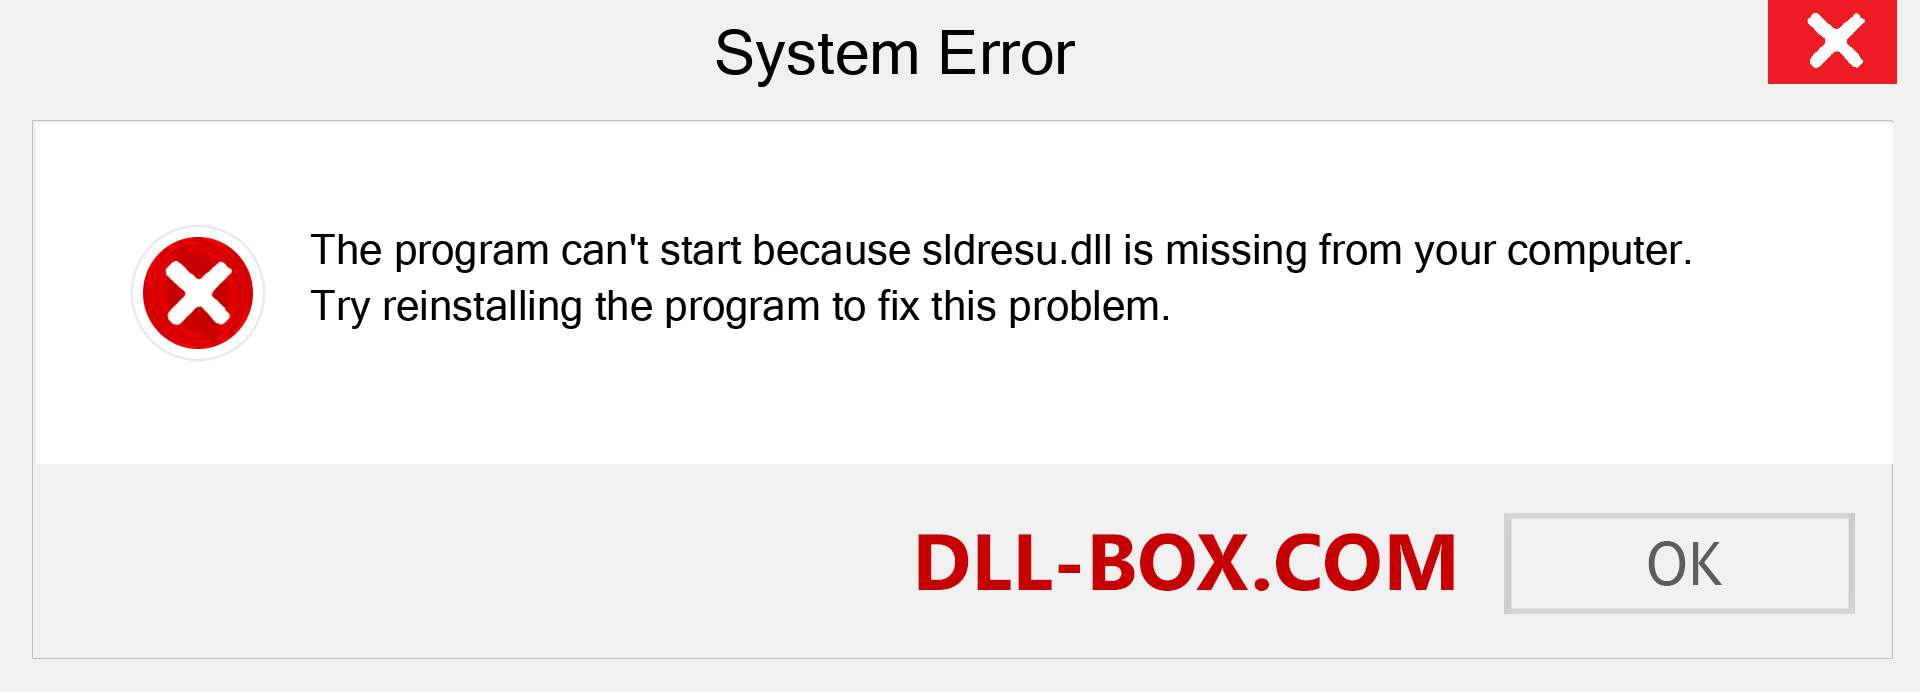  sldresu.dll file is missing?. Download for Windows 7, 8, 10 - Fix  sldresu dll Missing Error on Windows, photos, images